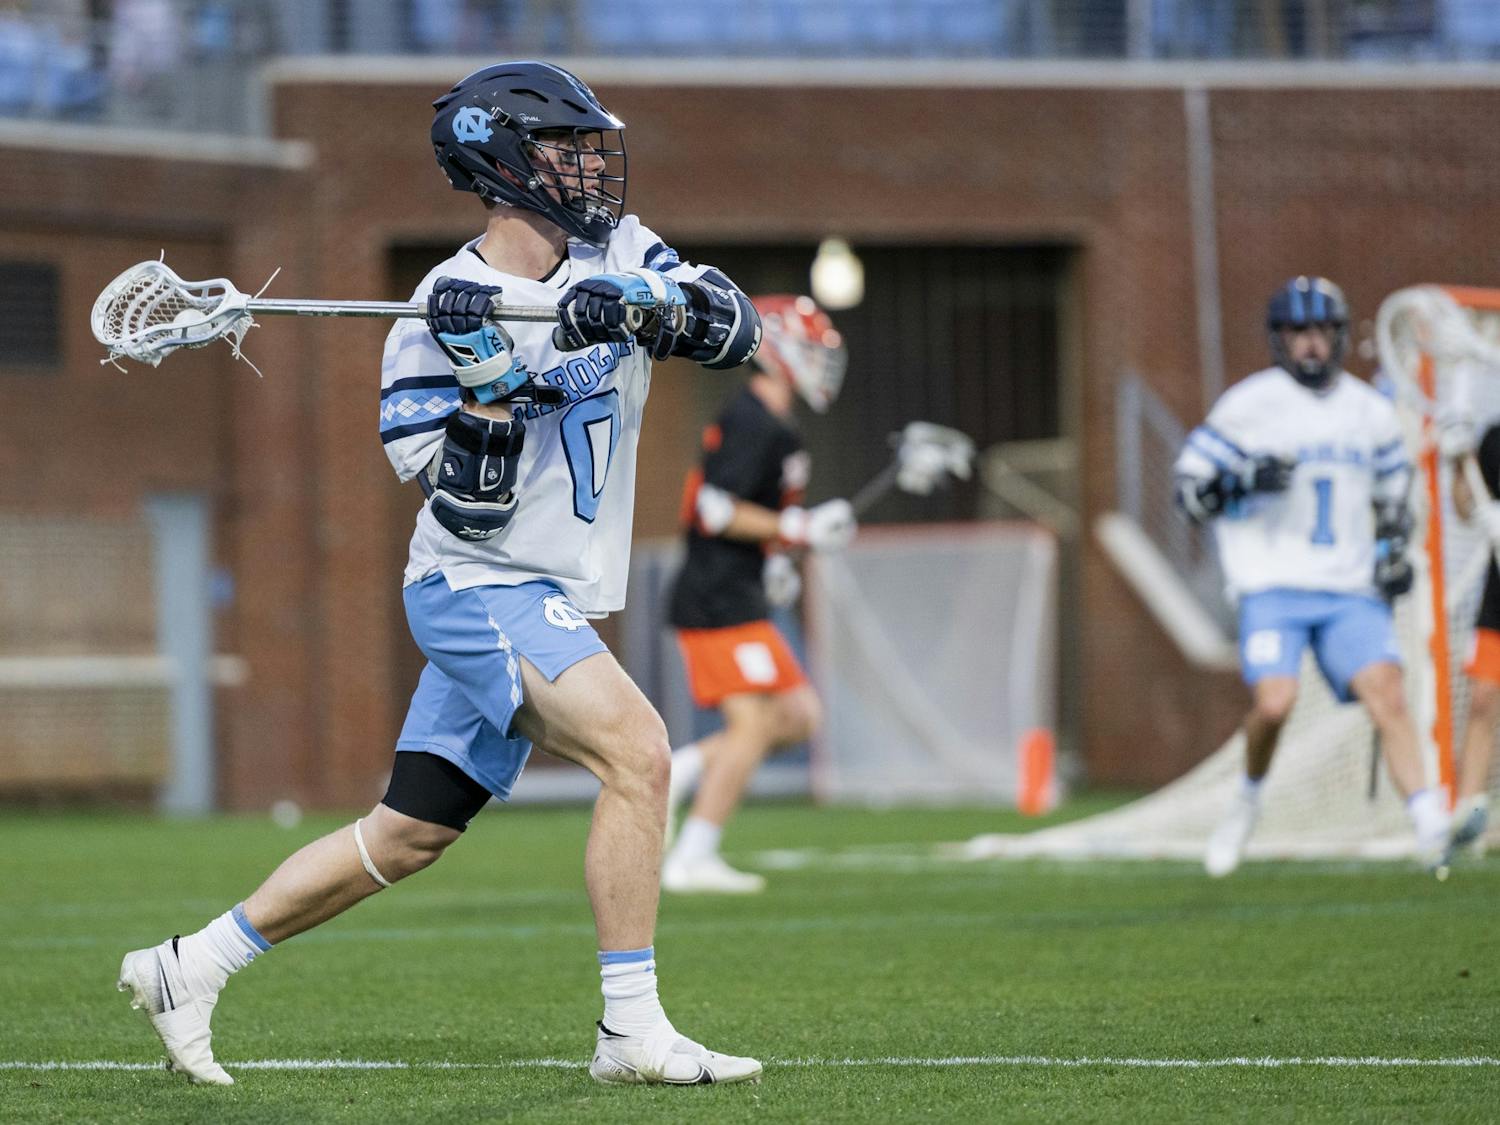 UNC senior attackman Lance Tillman (0) passes the ball during the men’s lacrosse game against Mercer at Dorrance Field on Friday, Feb. 10, 2023. UNC won 25-3.